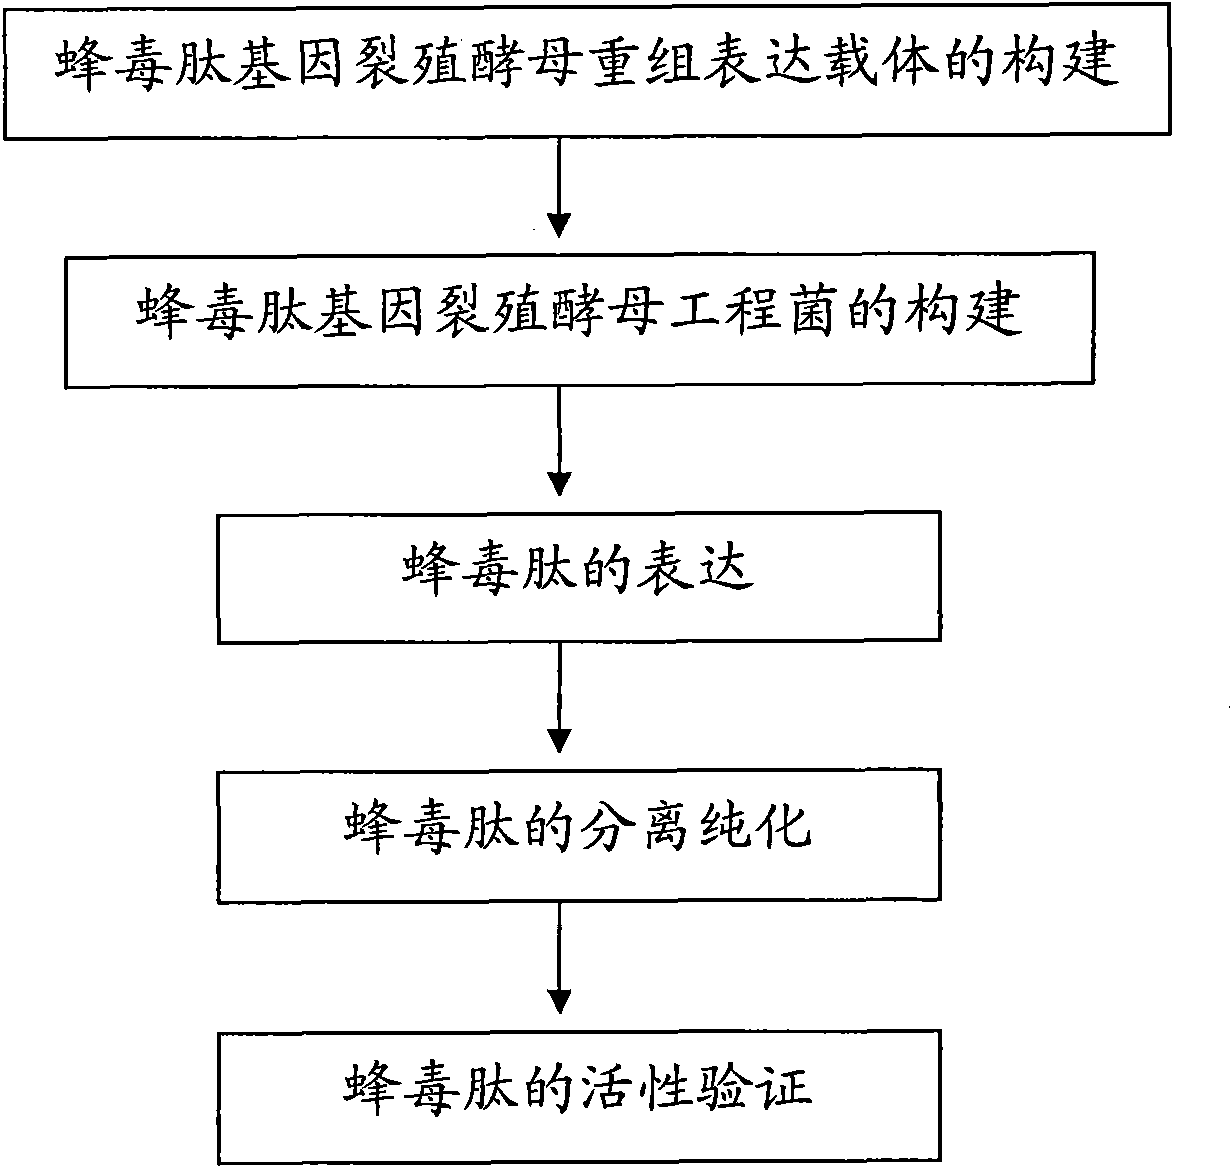 Melittin gene fission yeast engineering bacteria and construction method and application thereof